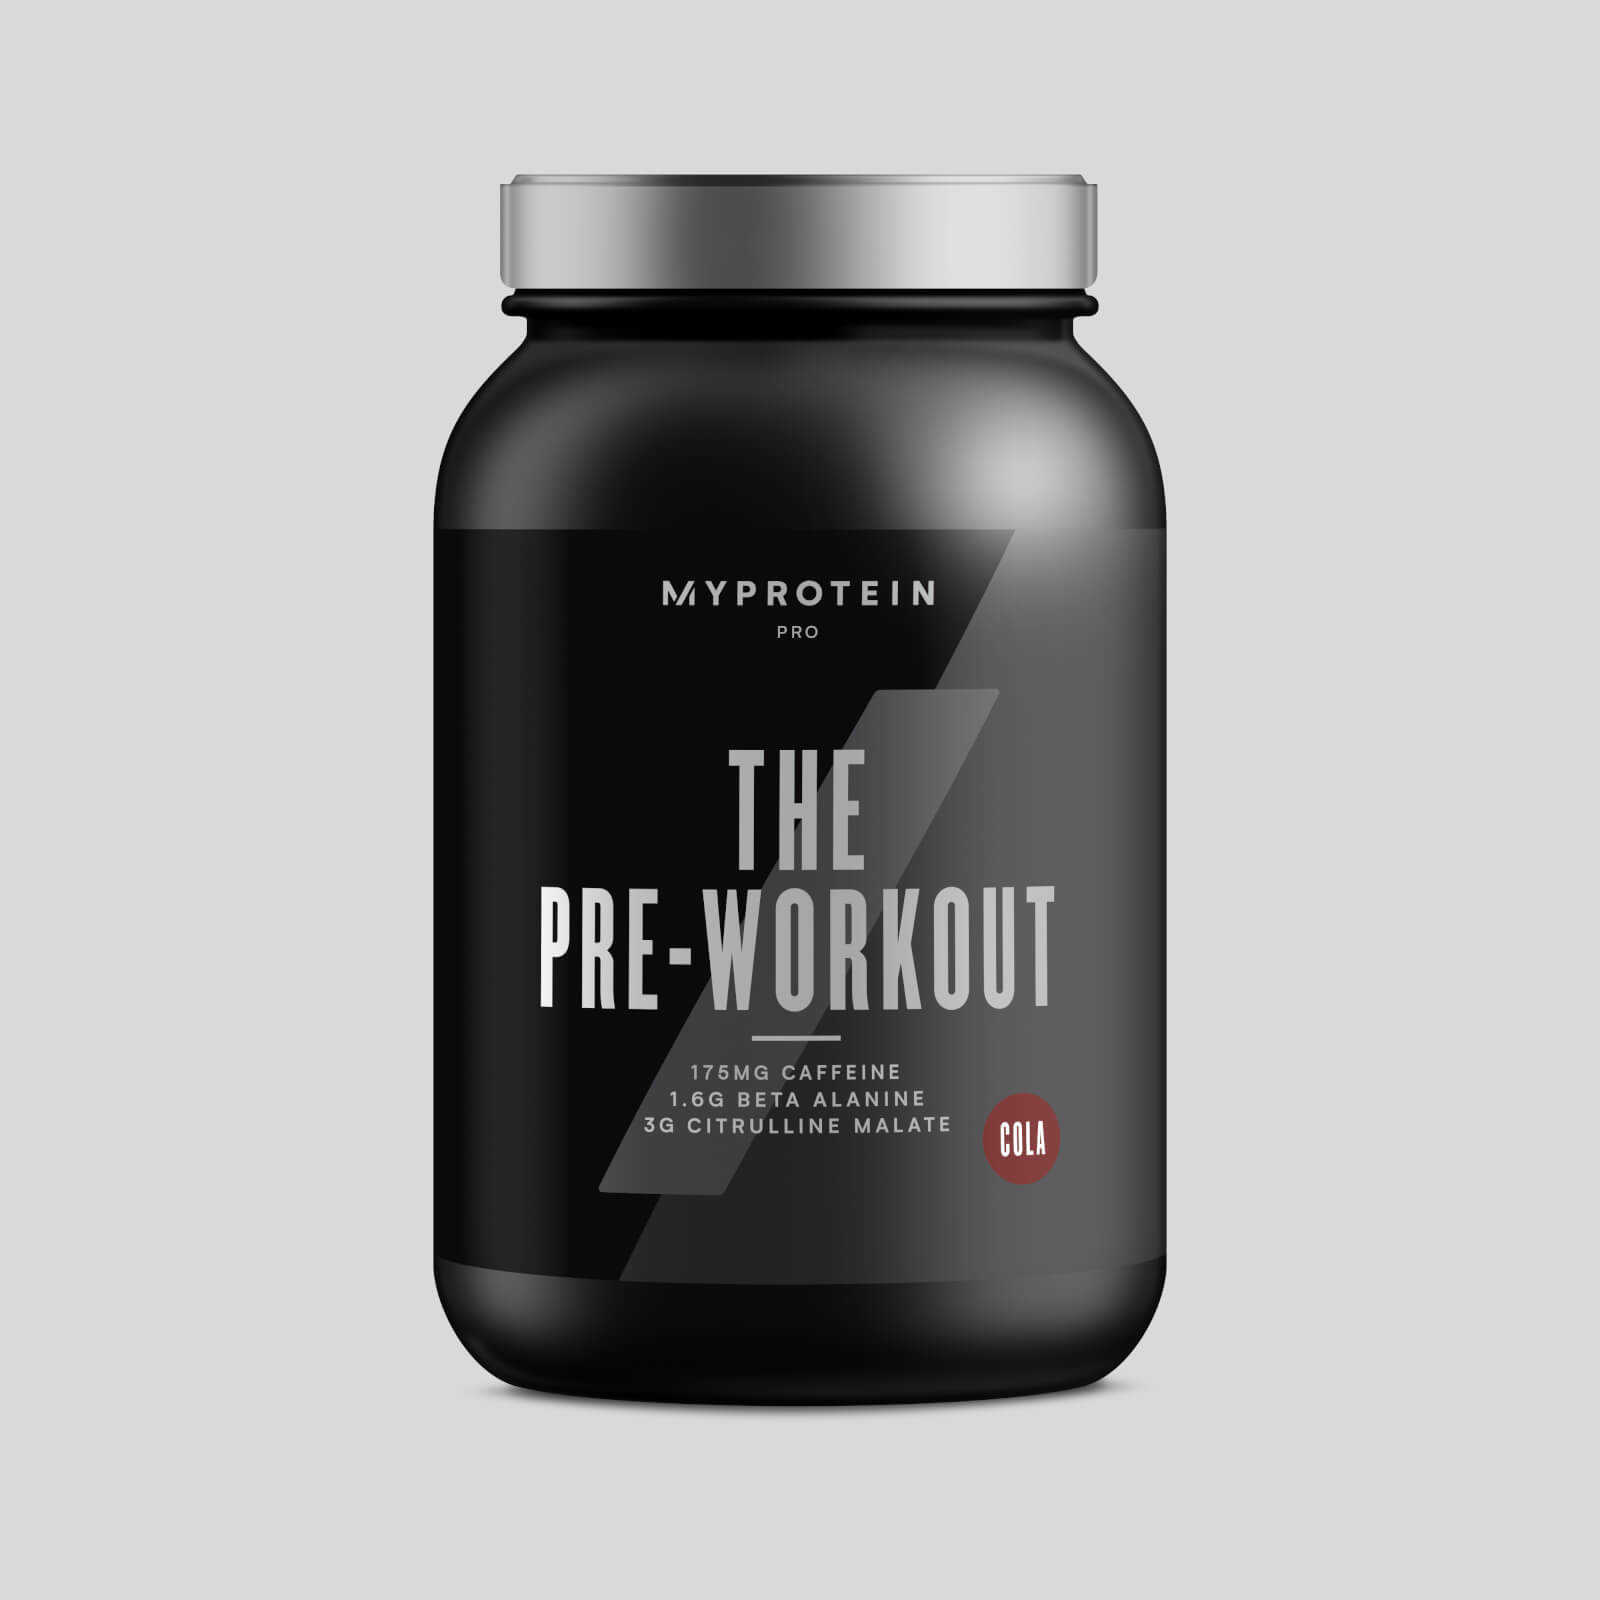 Myprotein THE Pre-Workout - 30servings - Cola